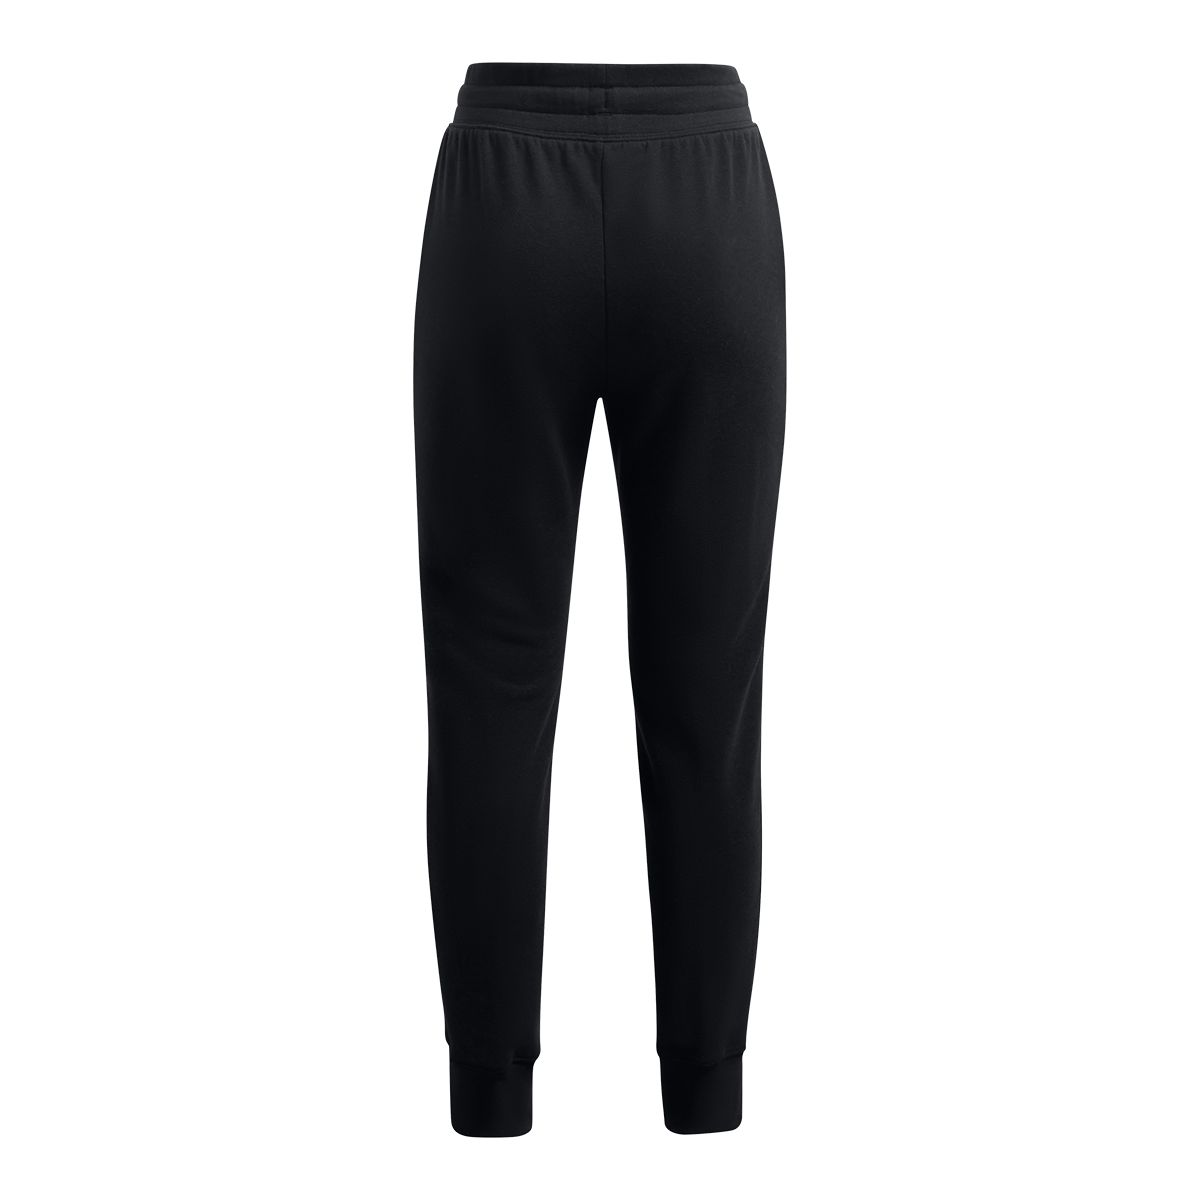 https://media-www.atmosphere.ca/product/div-03-softgoods/dpt-72-casual-clothing/sdpt-04-girls/333463763/ua-rival-fleece-joggers-blk-w-black-white-cerise-xs--a6eb2f05-e65f-45fc-8fe7-67900997471f-jpgrendition.jpg?imdensity=1&imwidth=1244&impolicy=mZoom